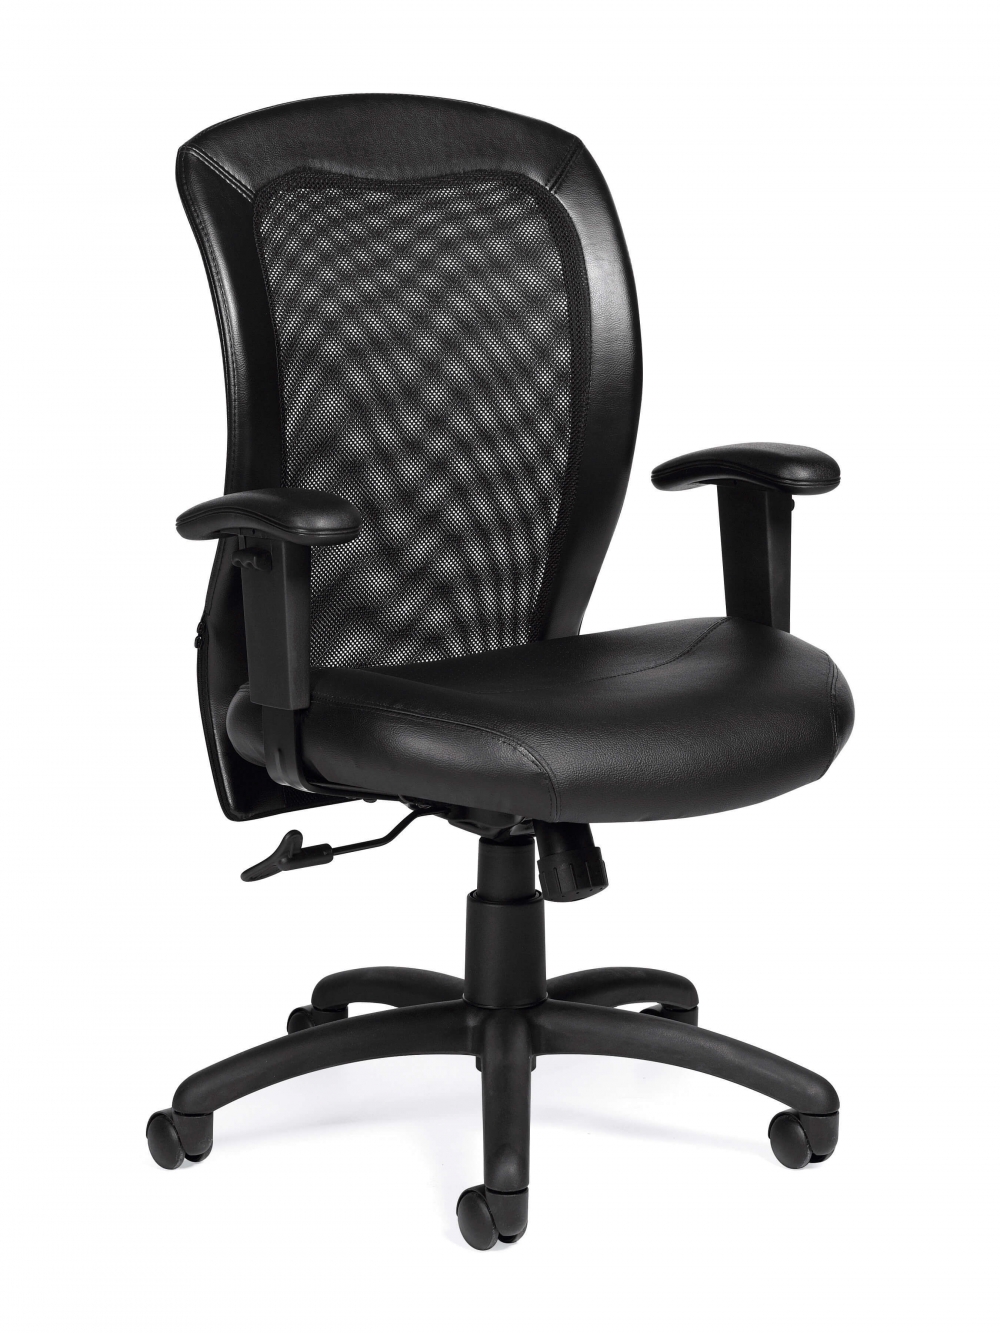 Office Desk Chairs - Abi Contemporary Office Chair